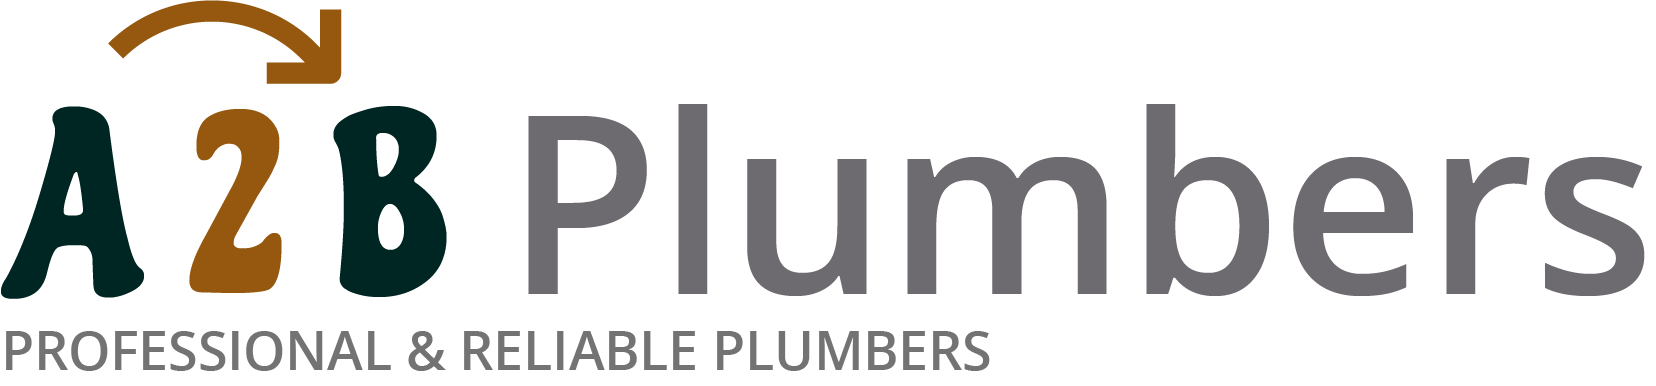 If you need a boiler installed, a radiator repaired or a leaking tap fixed, call us now - we provide services for properties in Holme and the local area.